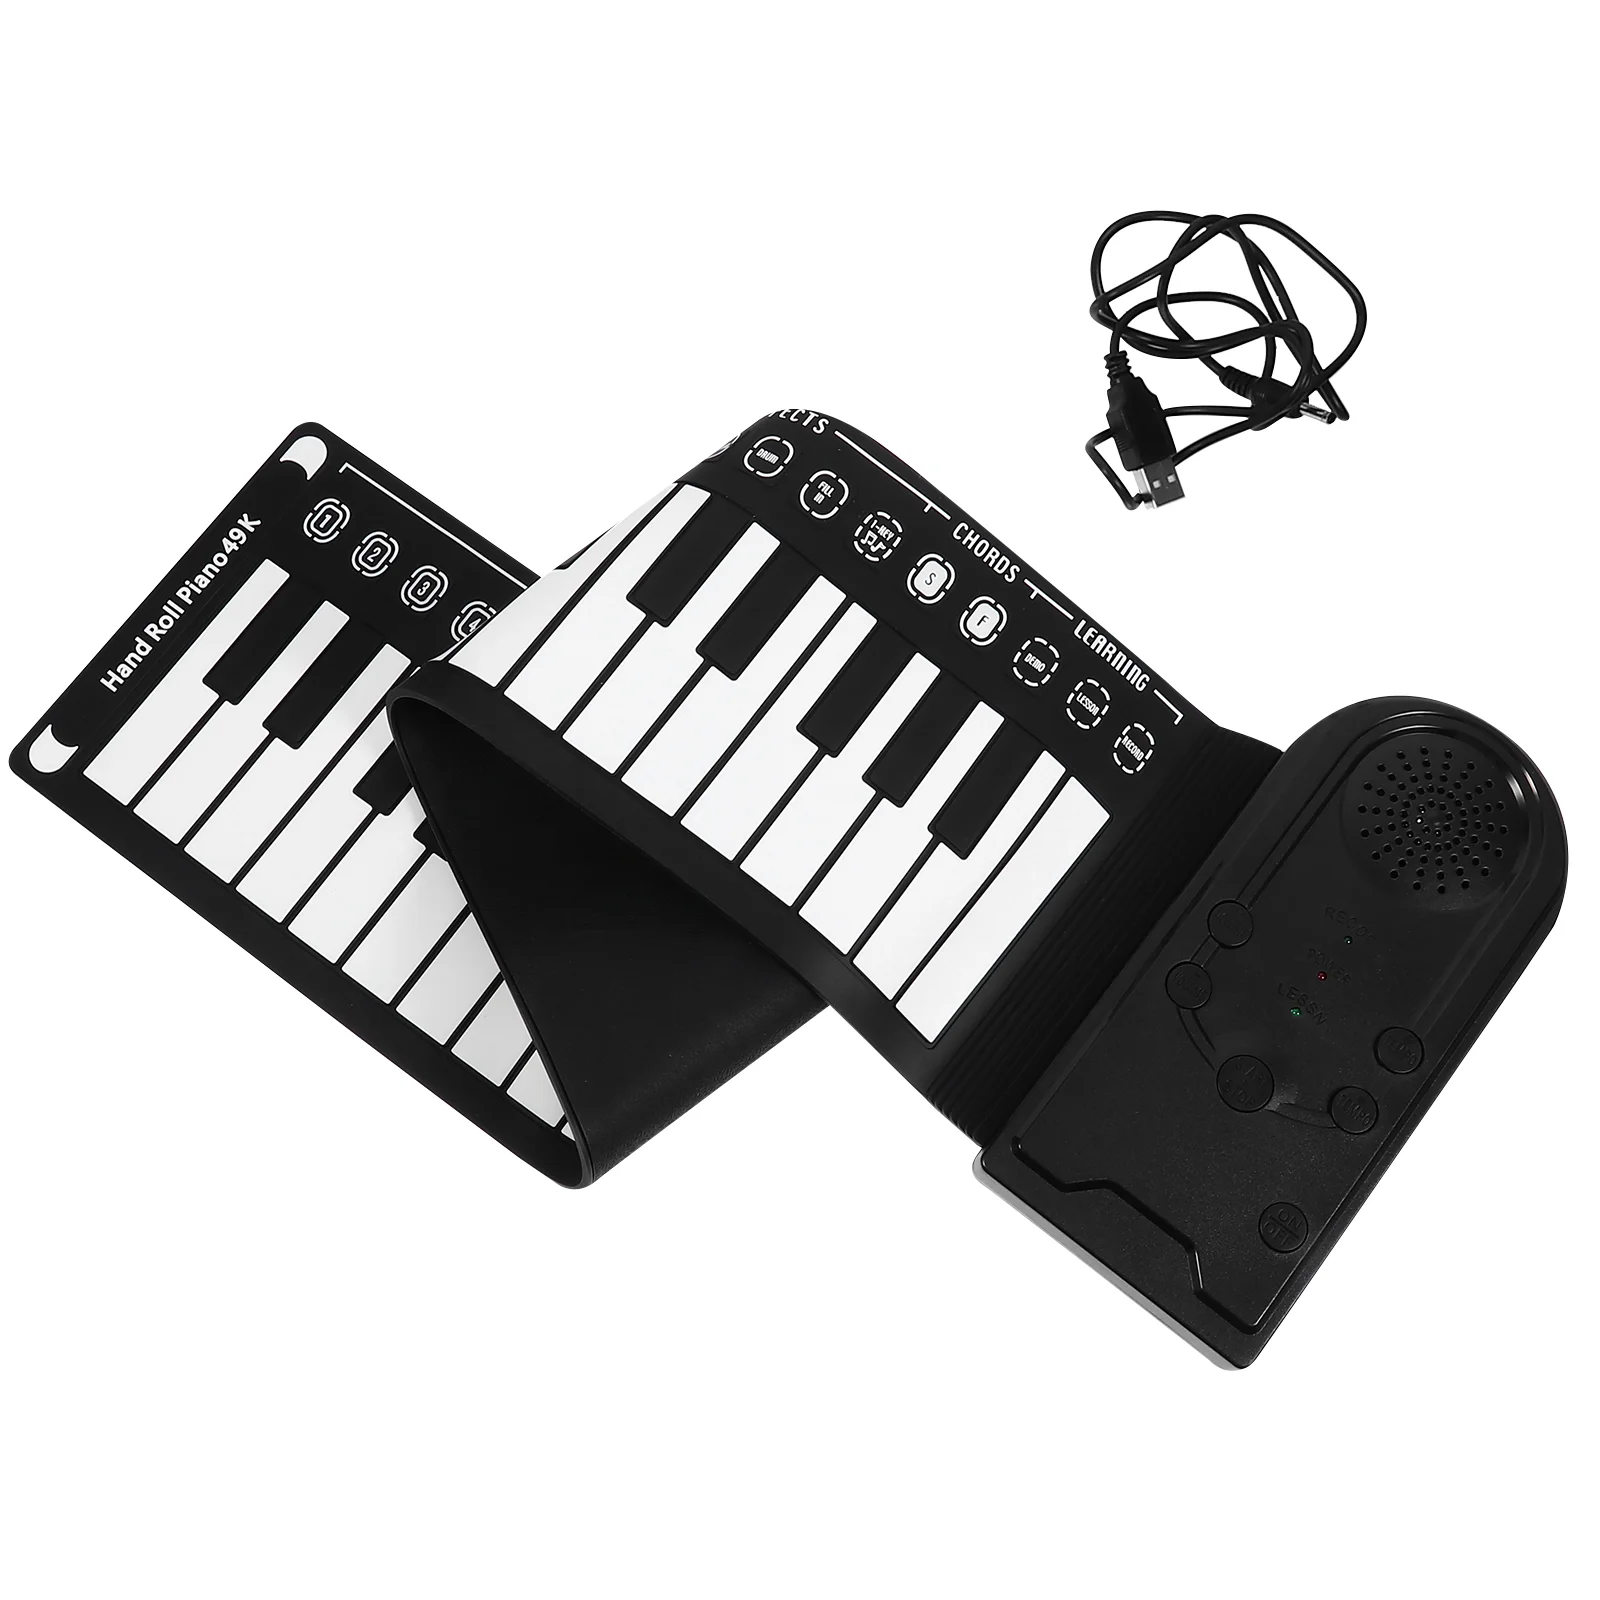 

49 Keys Roll Piano Digital Pianos for Beginner Electronic Foldable Silicone Keyboard Hand Rolled Silica Gel Instrument Child